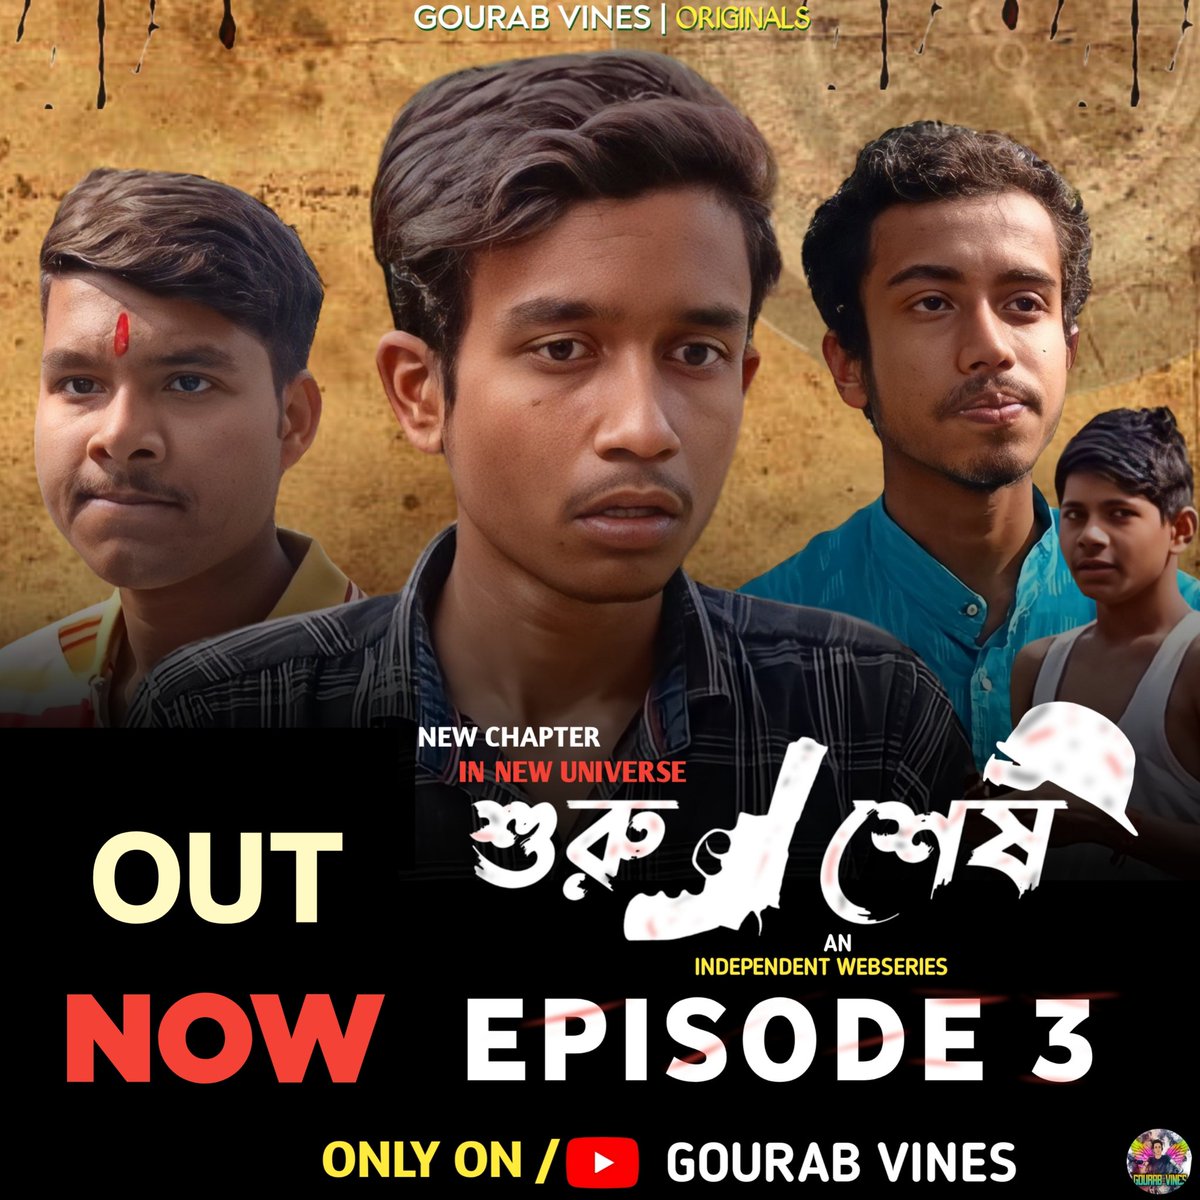 Suru/Sesh episode 3 out now
Link : youtu.be/KqyZoi2extQ
Please check out now 👆

#surusesh #gourabvines #Webseries #Bengali #bengaliwebseries #episodes #Twitter #TwitterFiles #twite #Twitterpost #viral #RetweeetPlease